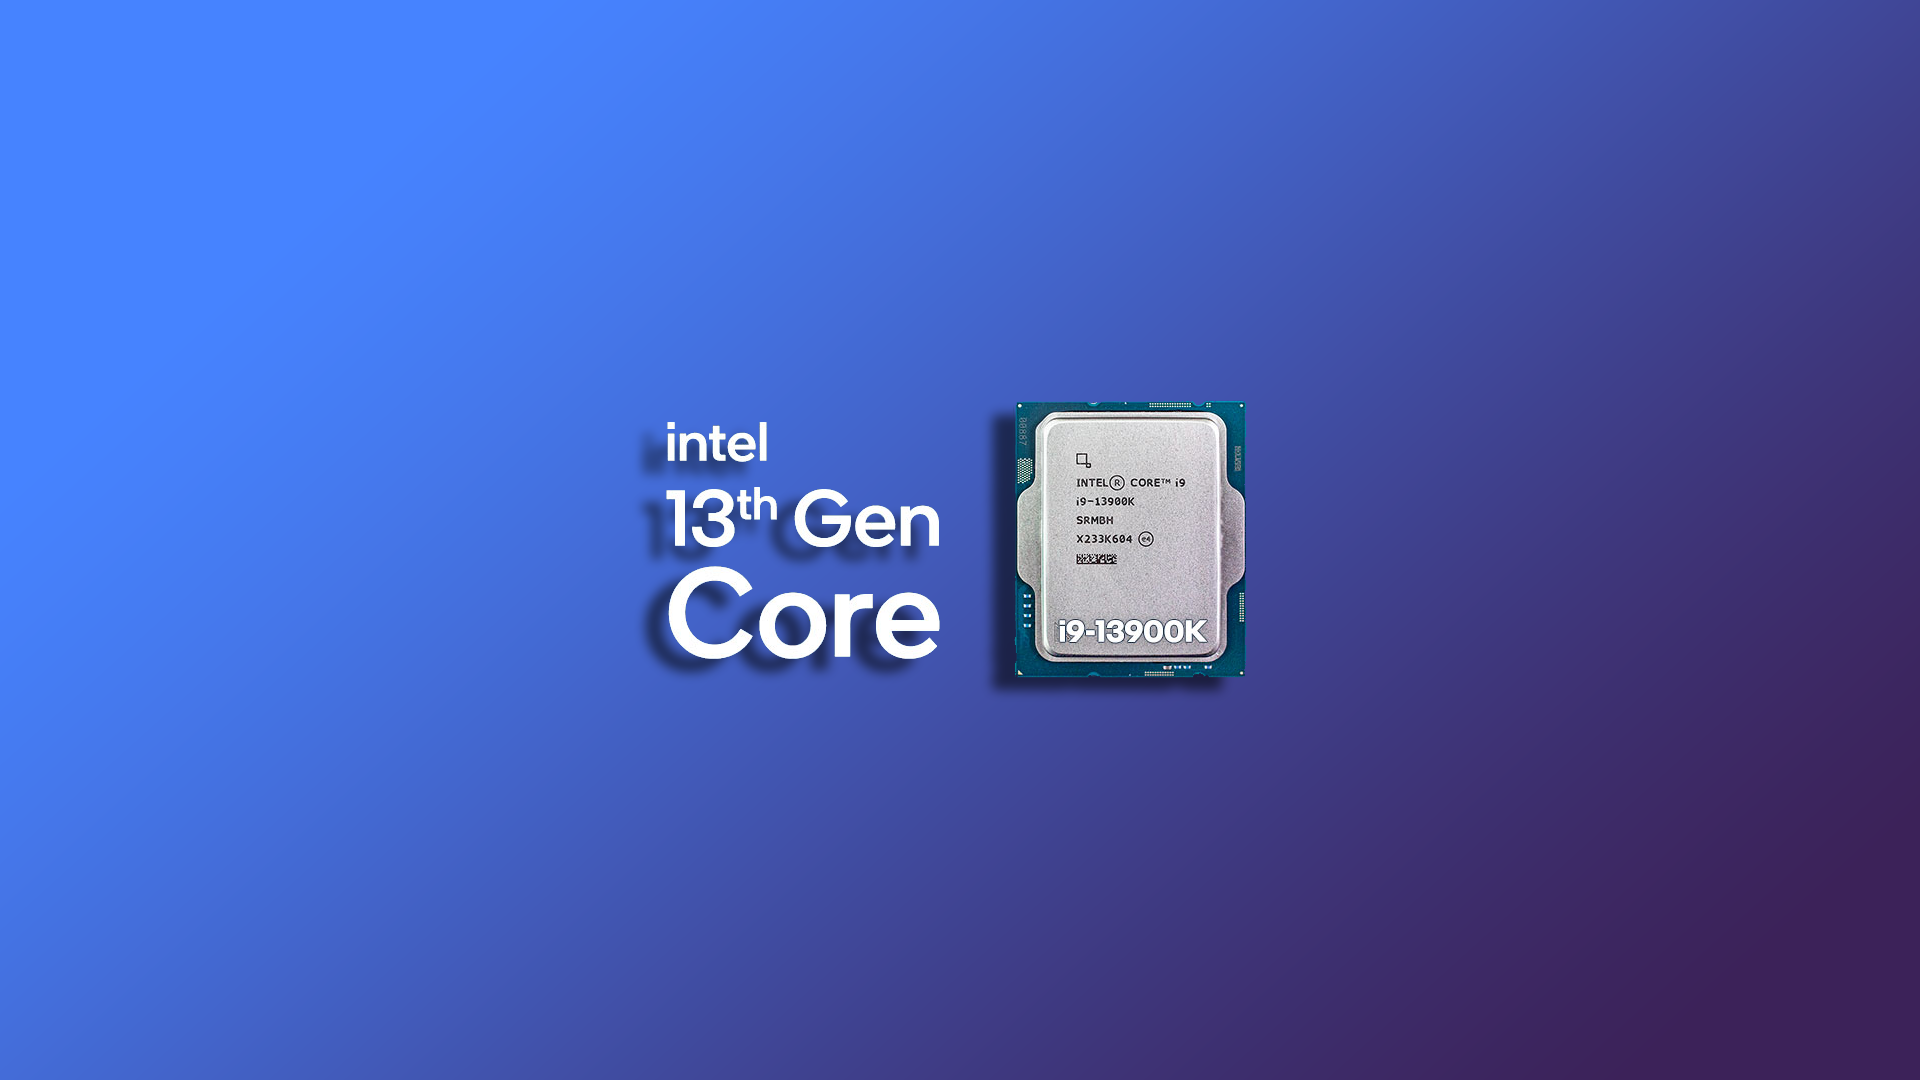 Intel's 13th generation Core processor line prices have appeared